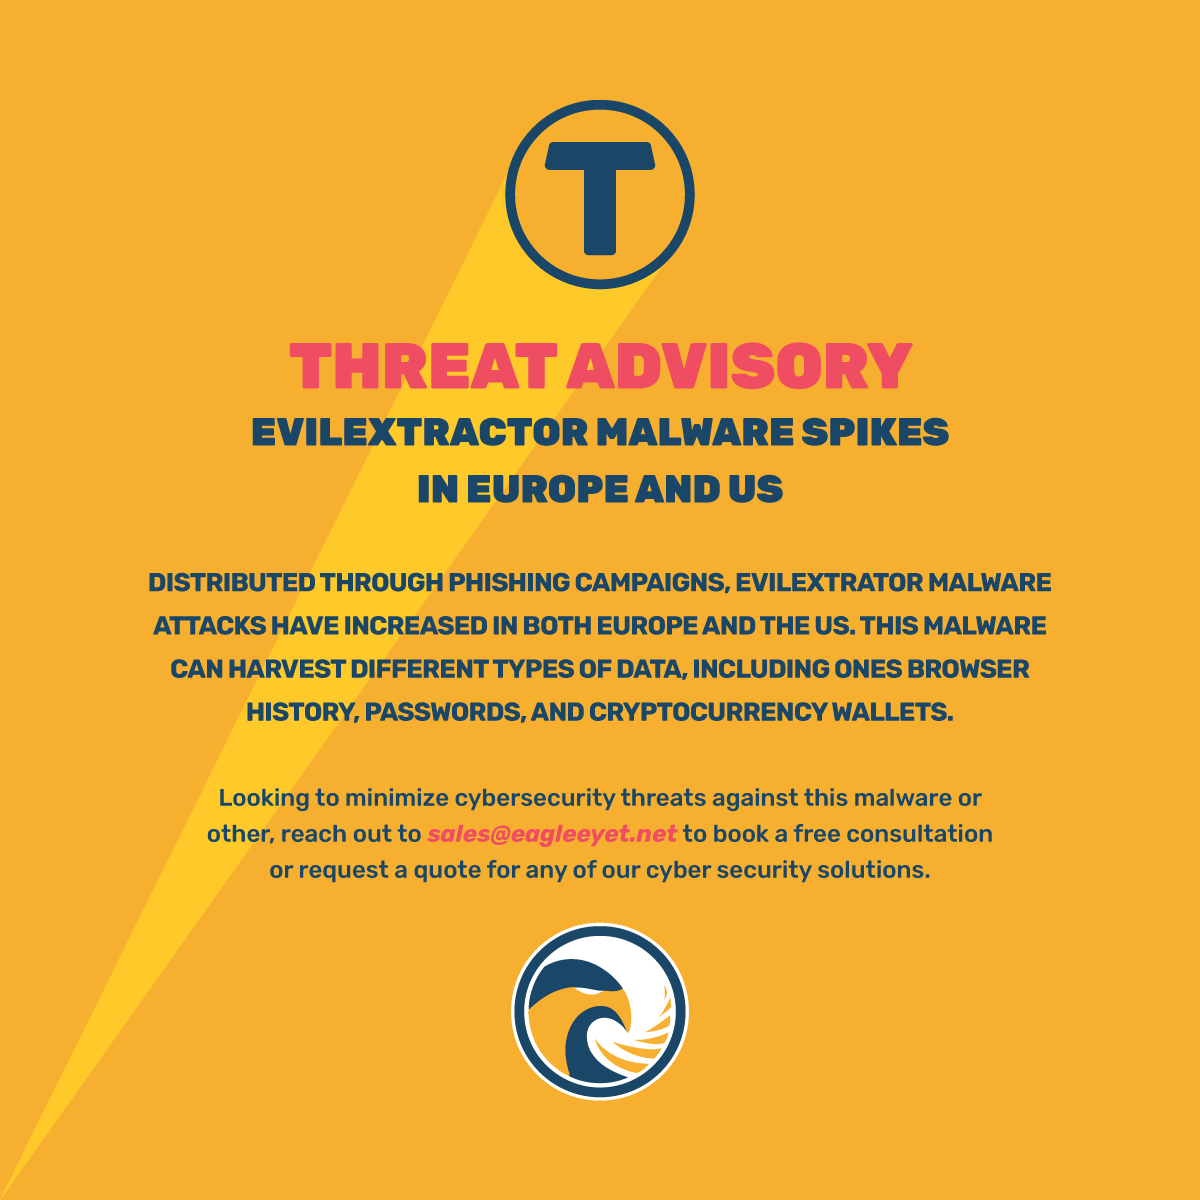 Threat Advisory EvilExtractor Malware Spikes In Europe and US